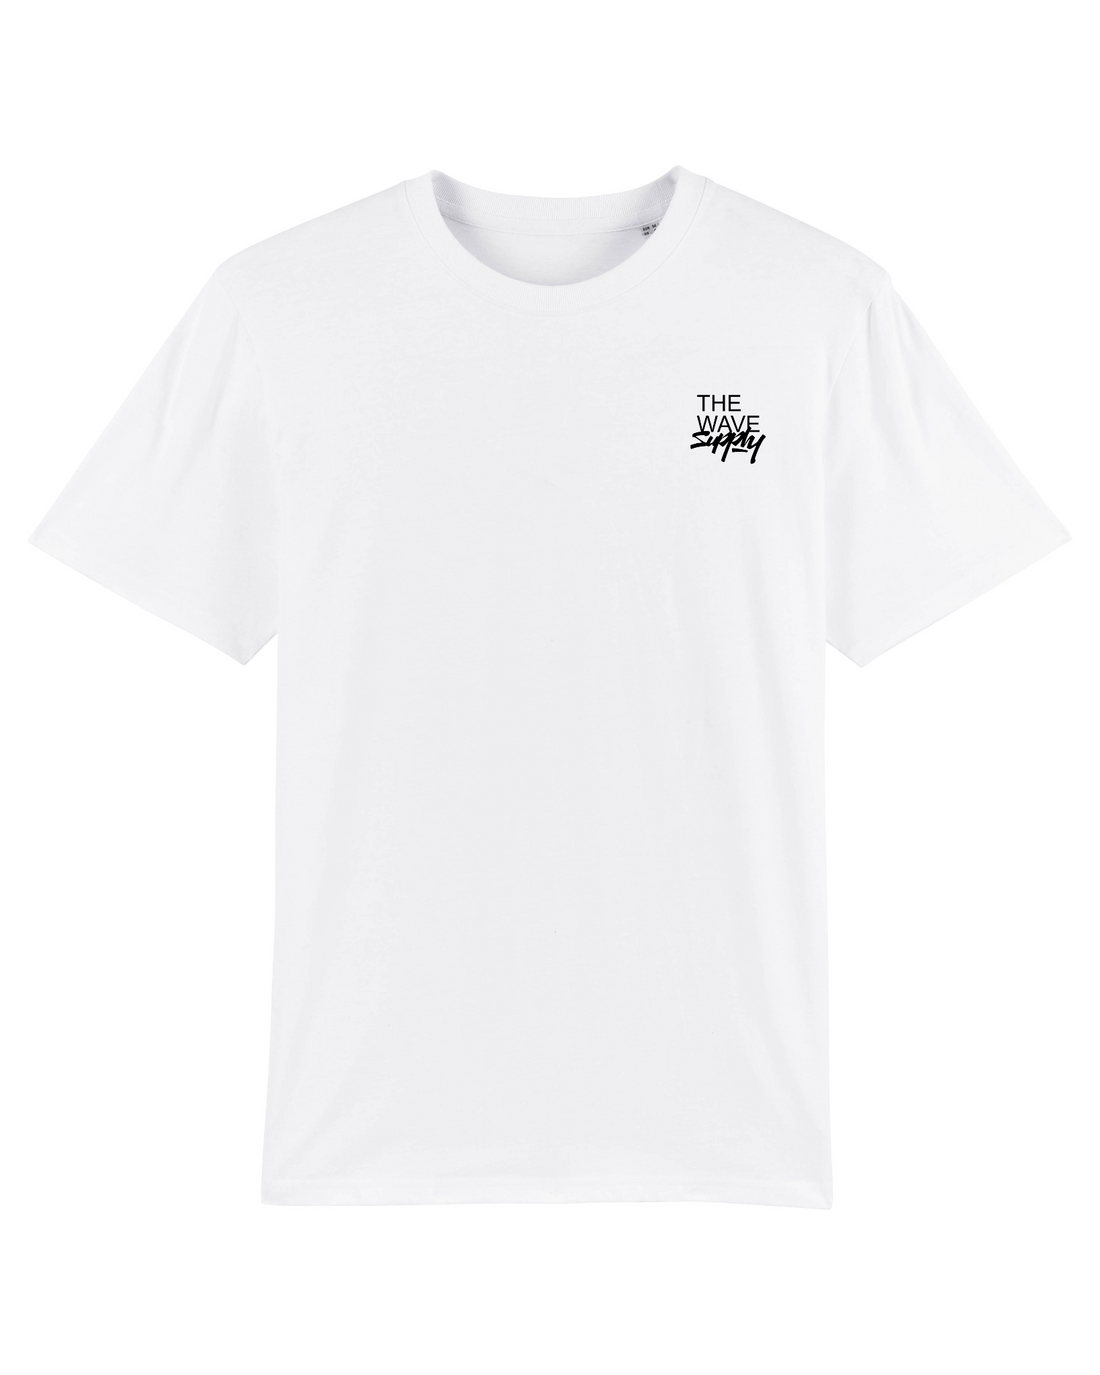 White Skater T-Shirt, Catch The Wave Front Print